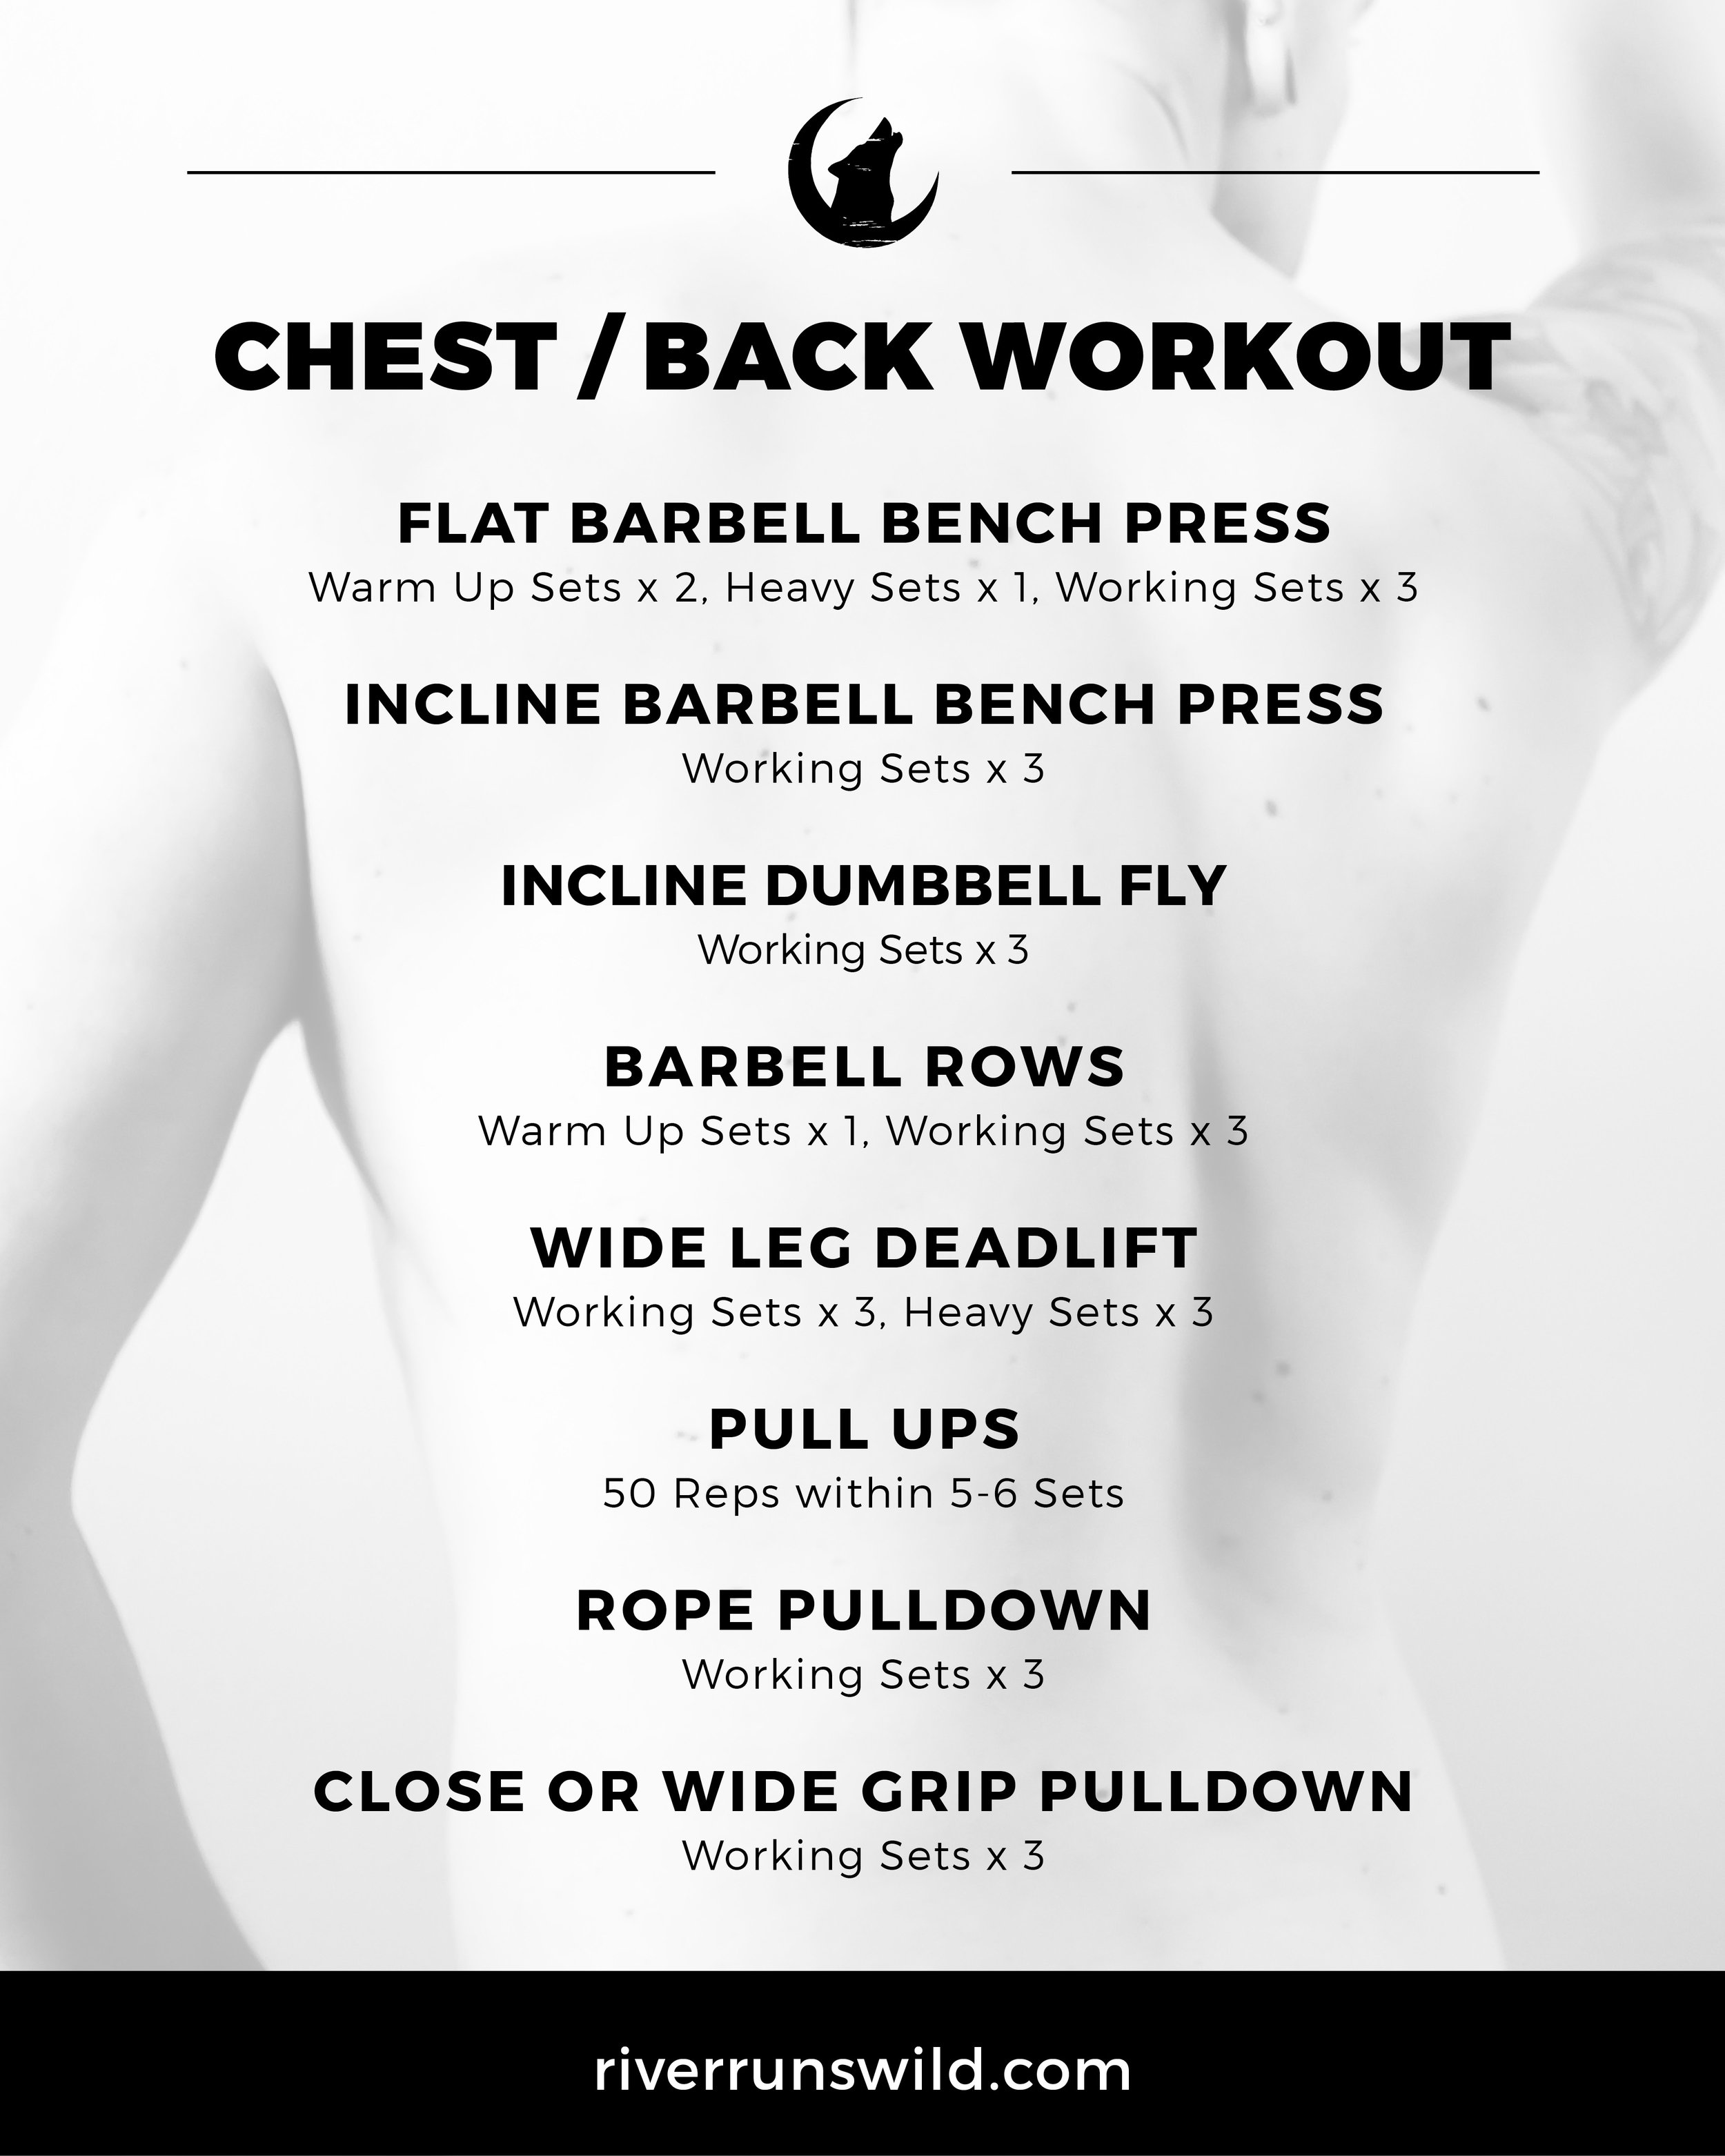 How to Have Back Workout At Home